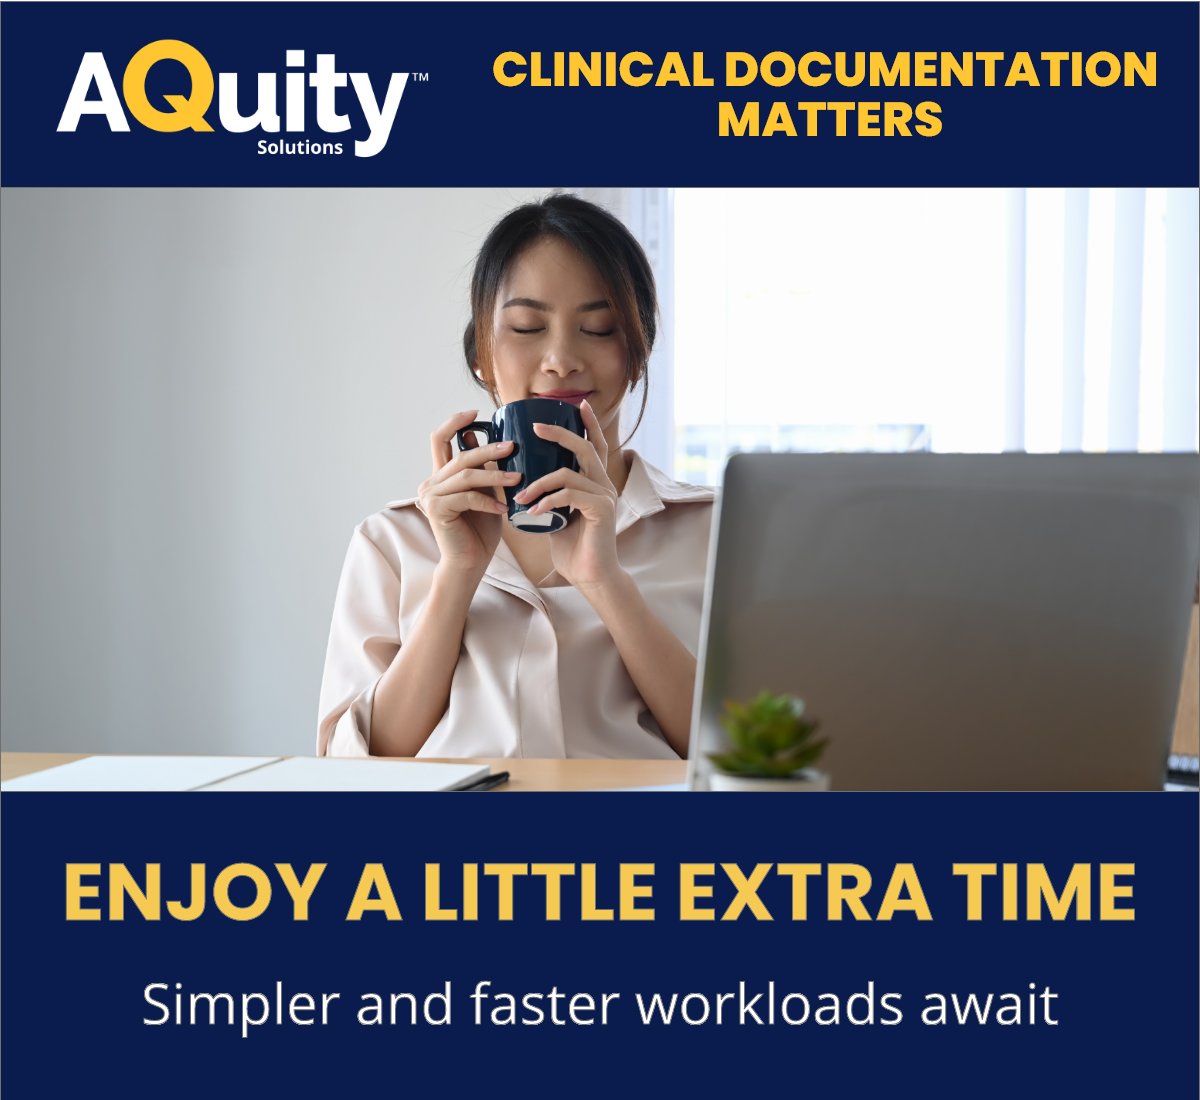 #AQuitySolutions can improve your documentation workflow efficiency in a way that’s convenient and cost-effective to you. aquitysolutions.com/solutions/clin… #workflowsolutions #customizedservices